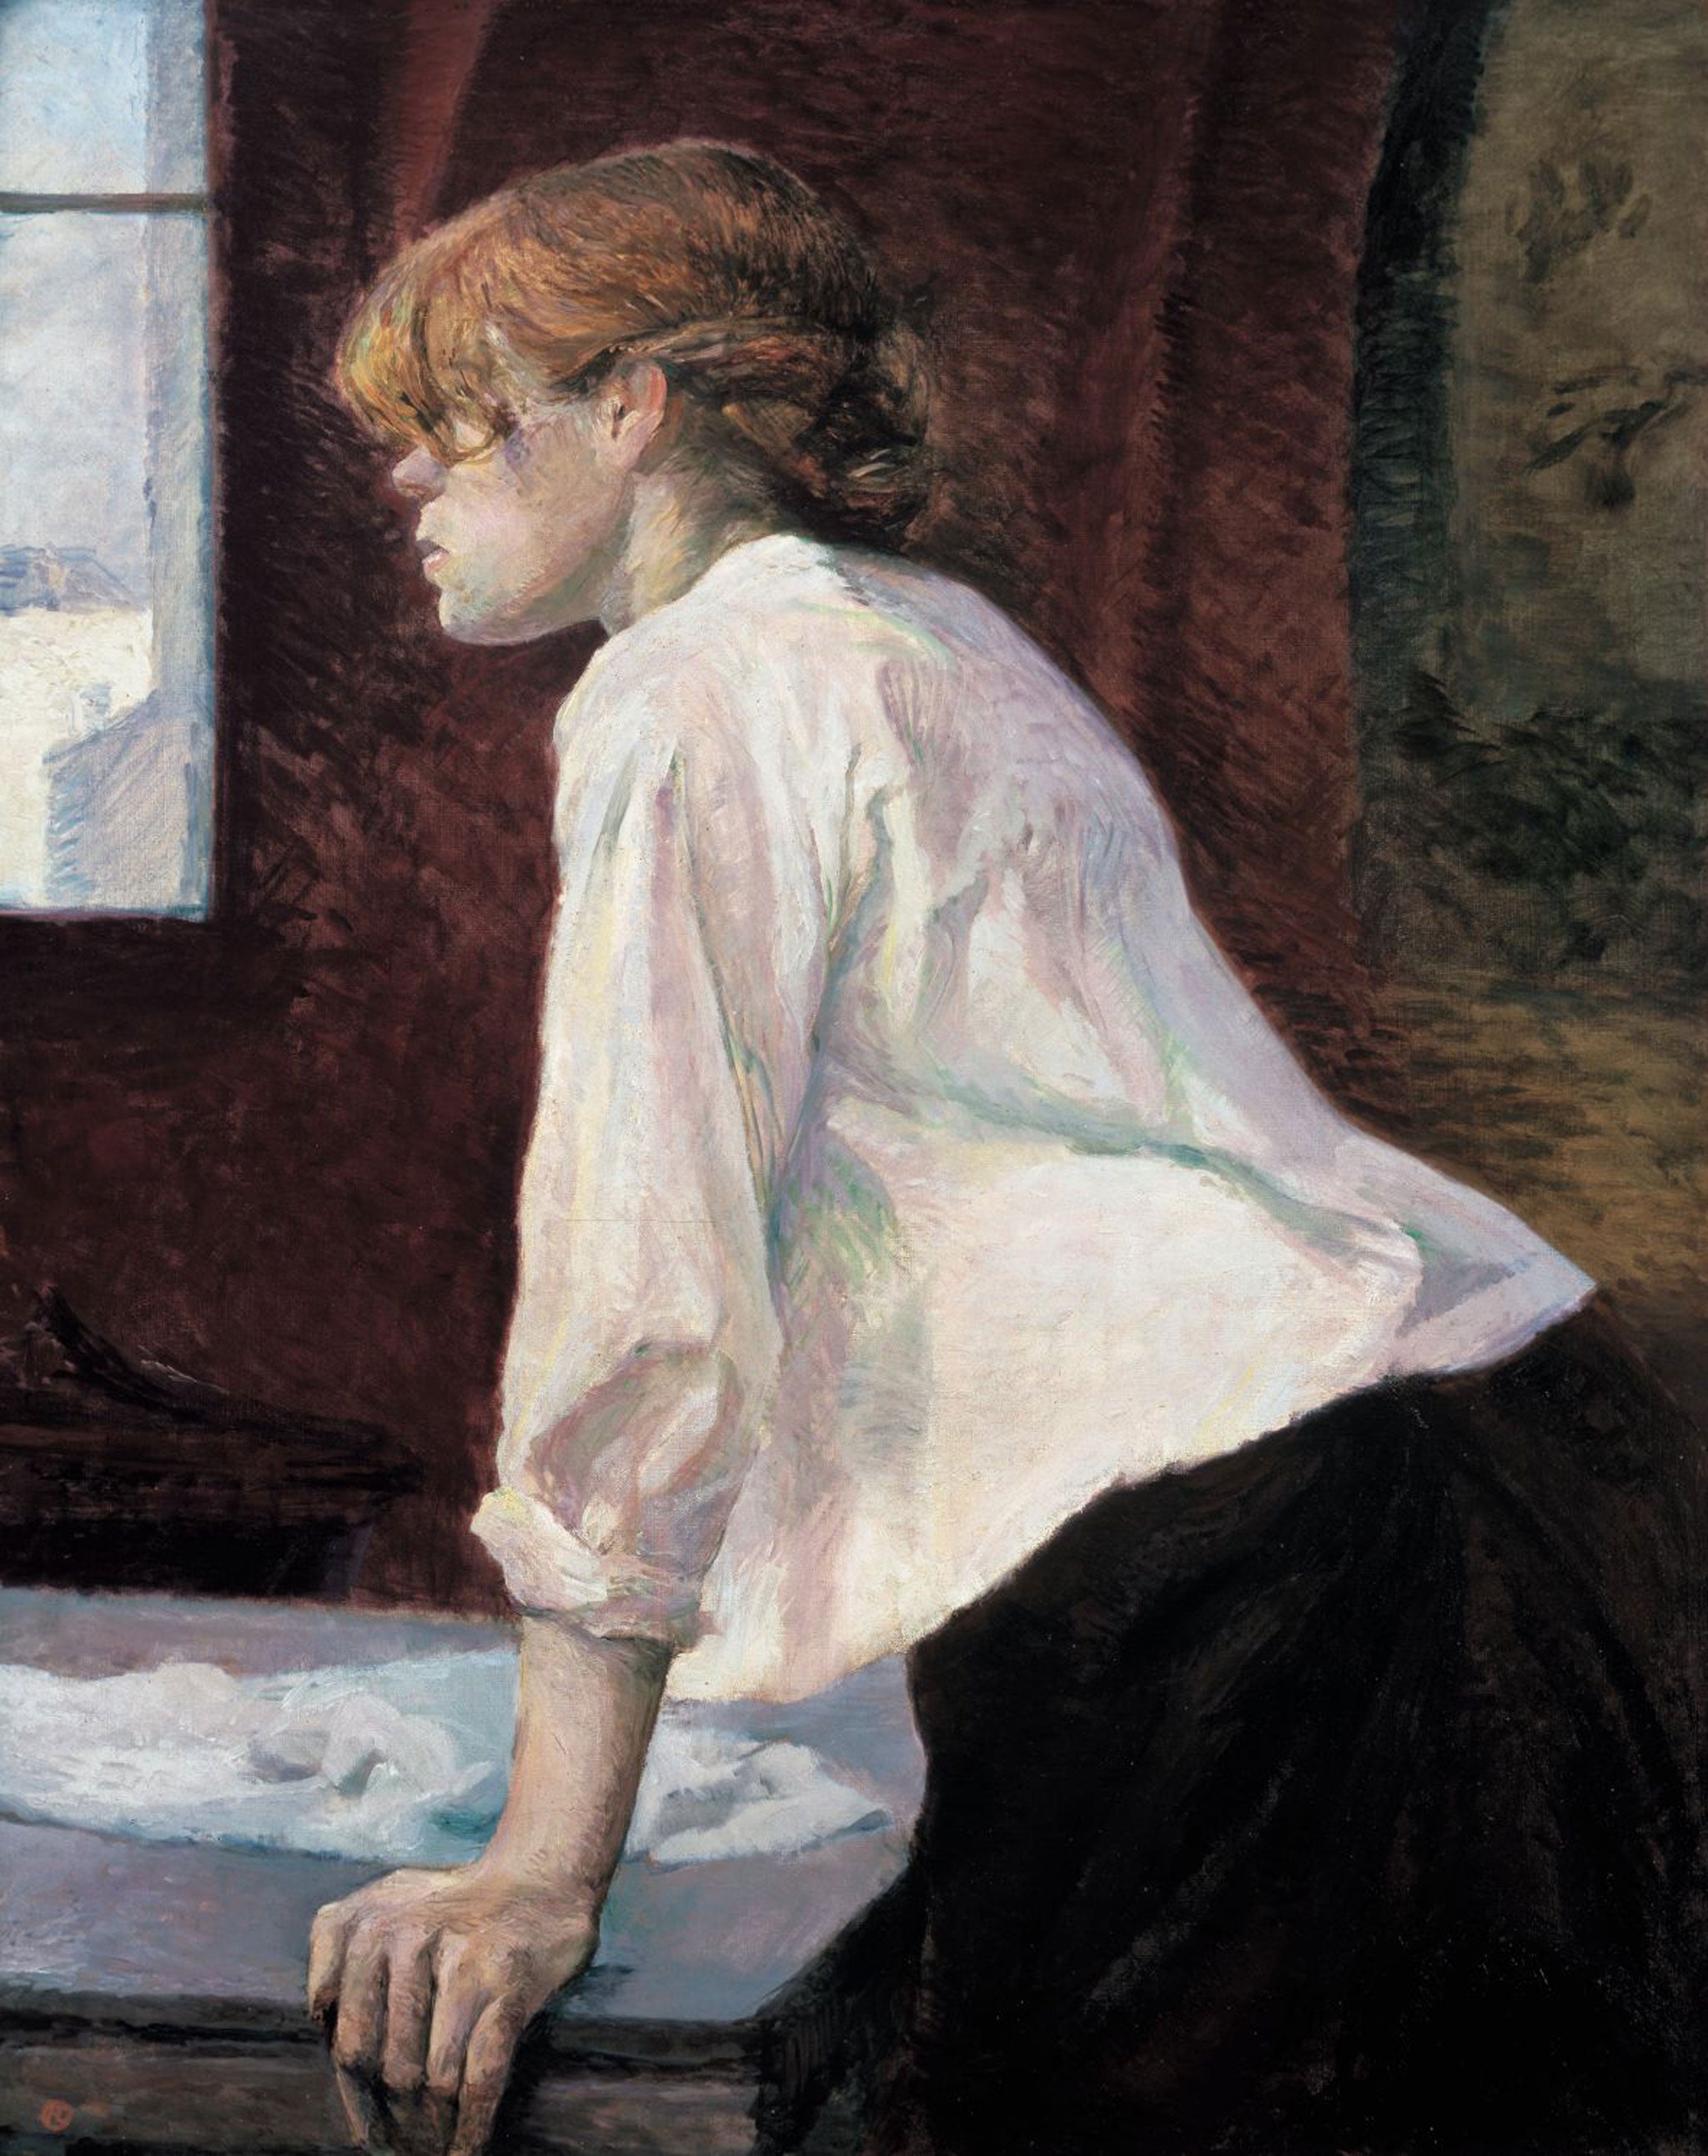 The Laundress by Toulouse-Lautrec dates from late 1886